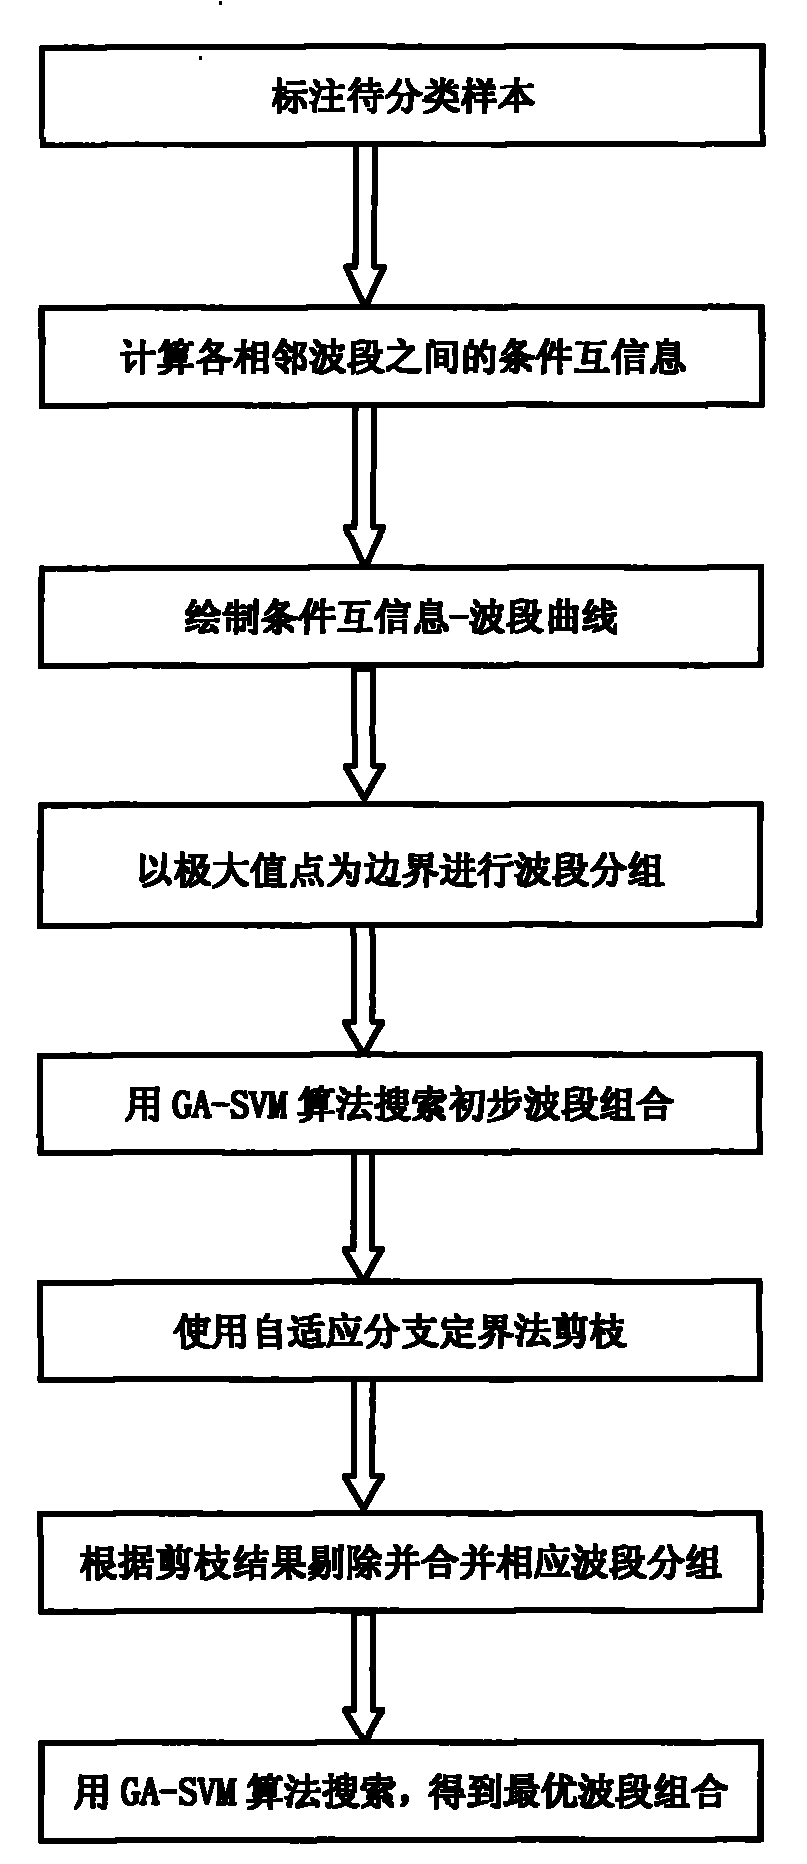 Remote sensing hyperspectral image band selection method based on conditional mutual information